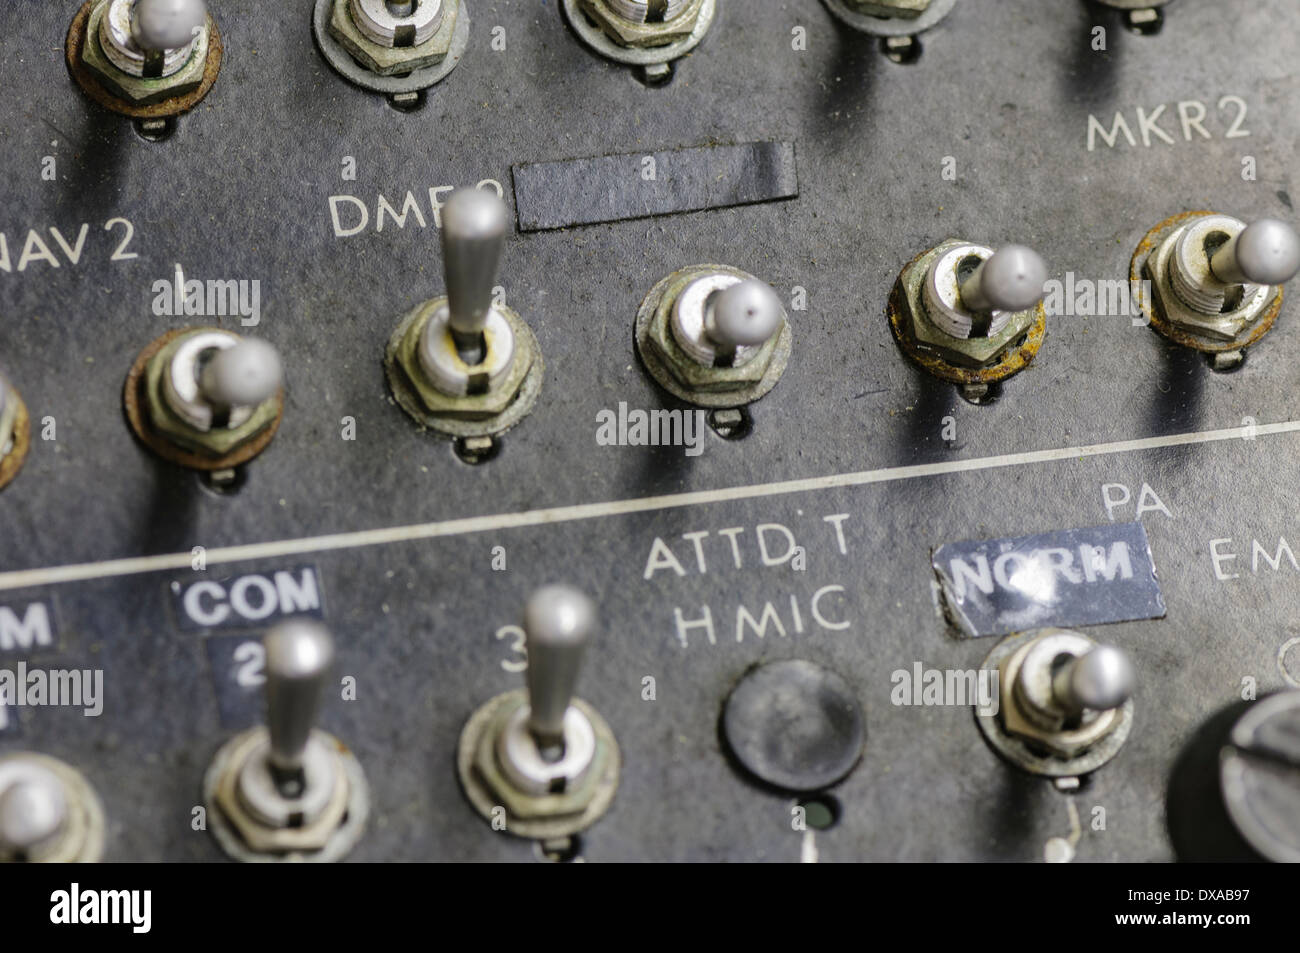 Communications control panel in an old airplane. Stock Photo